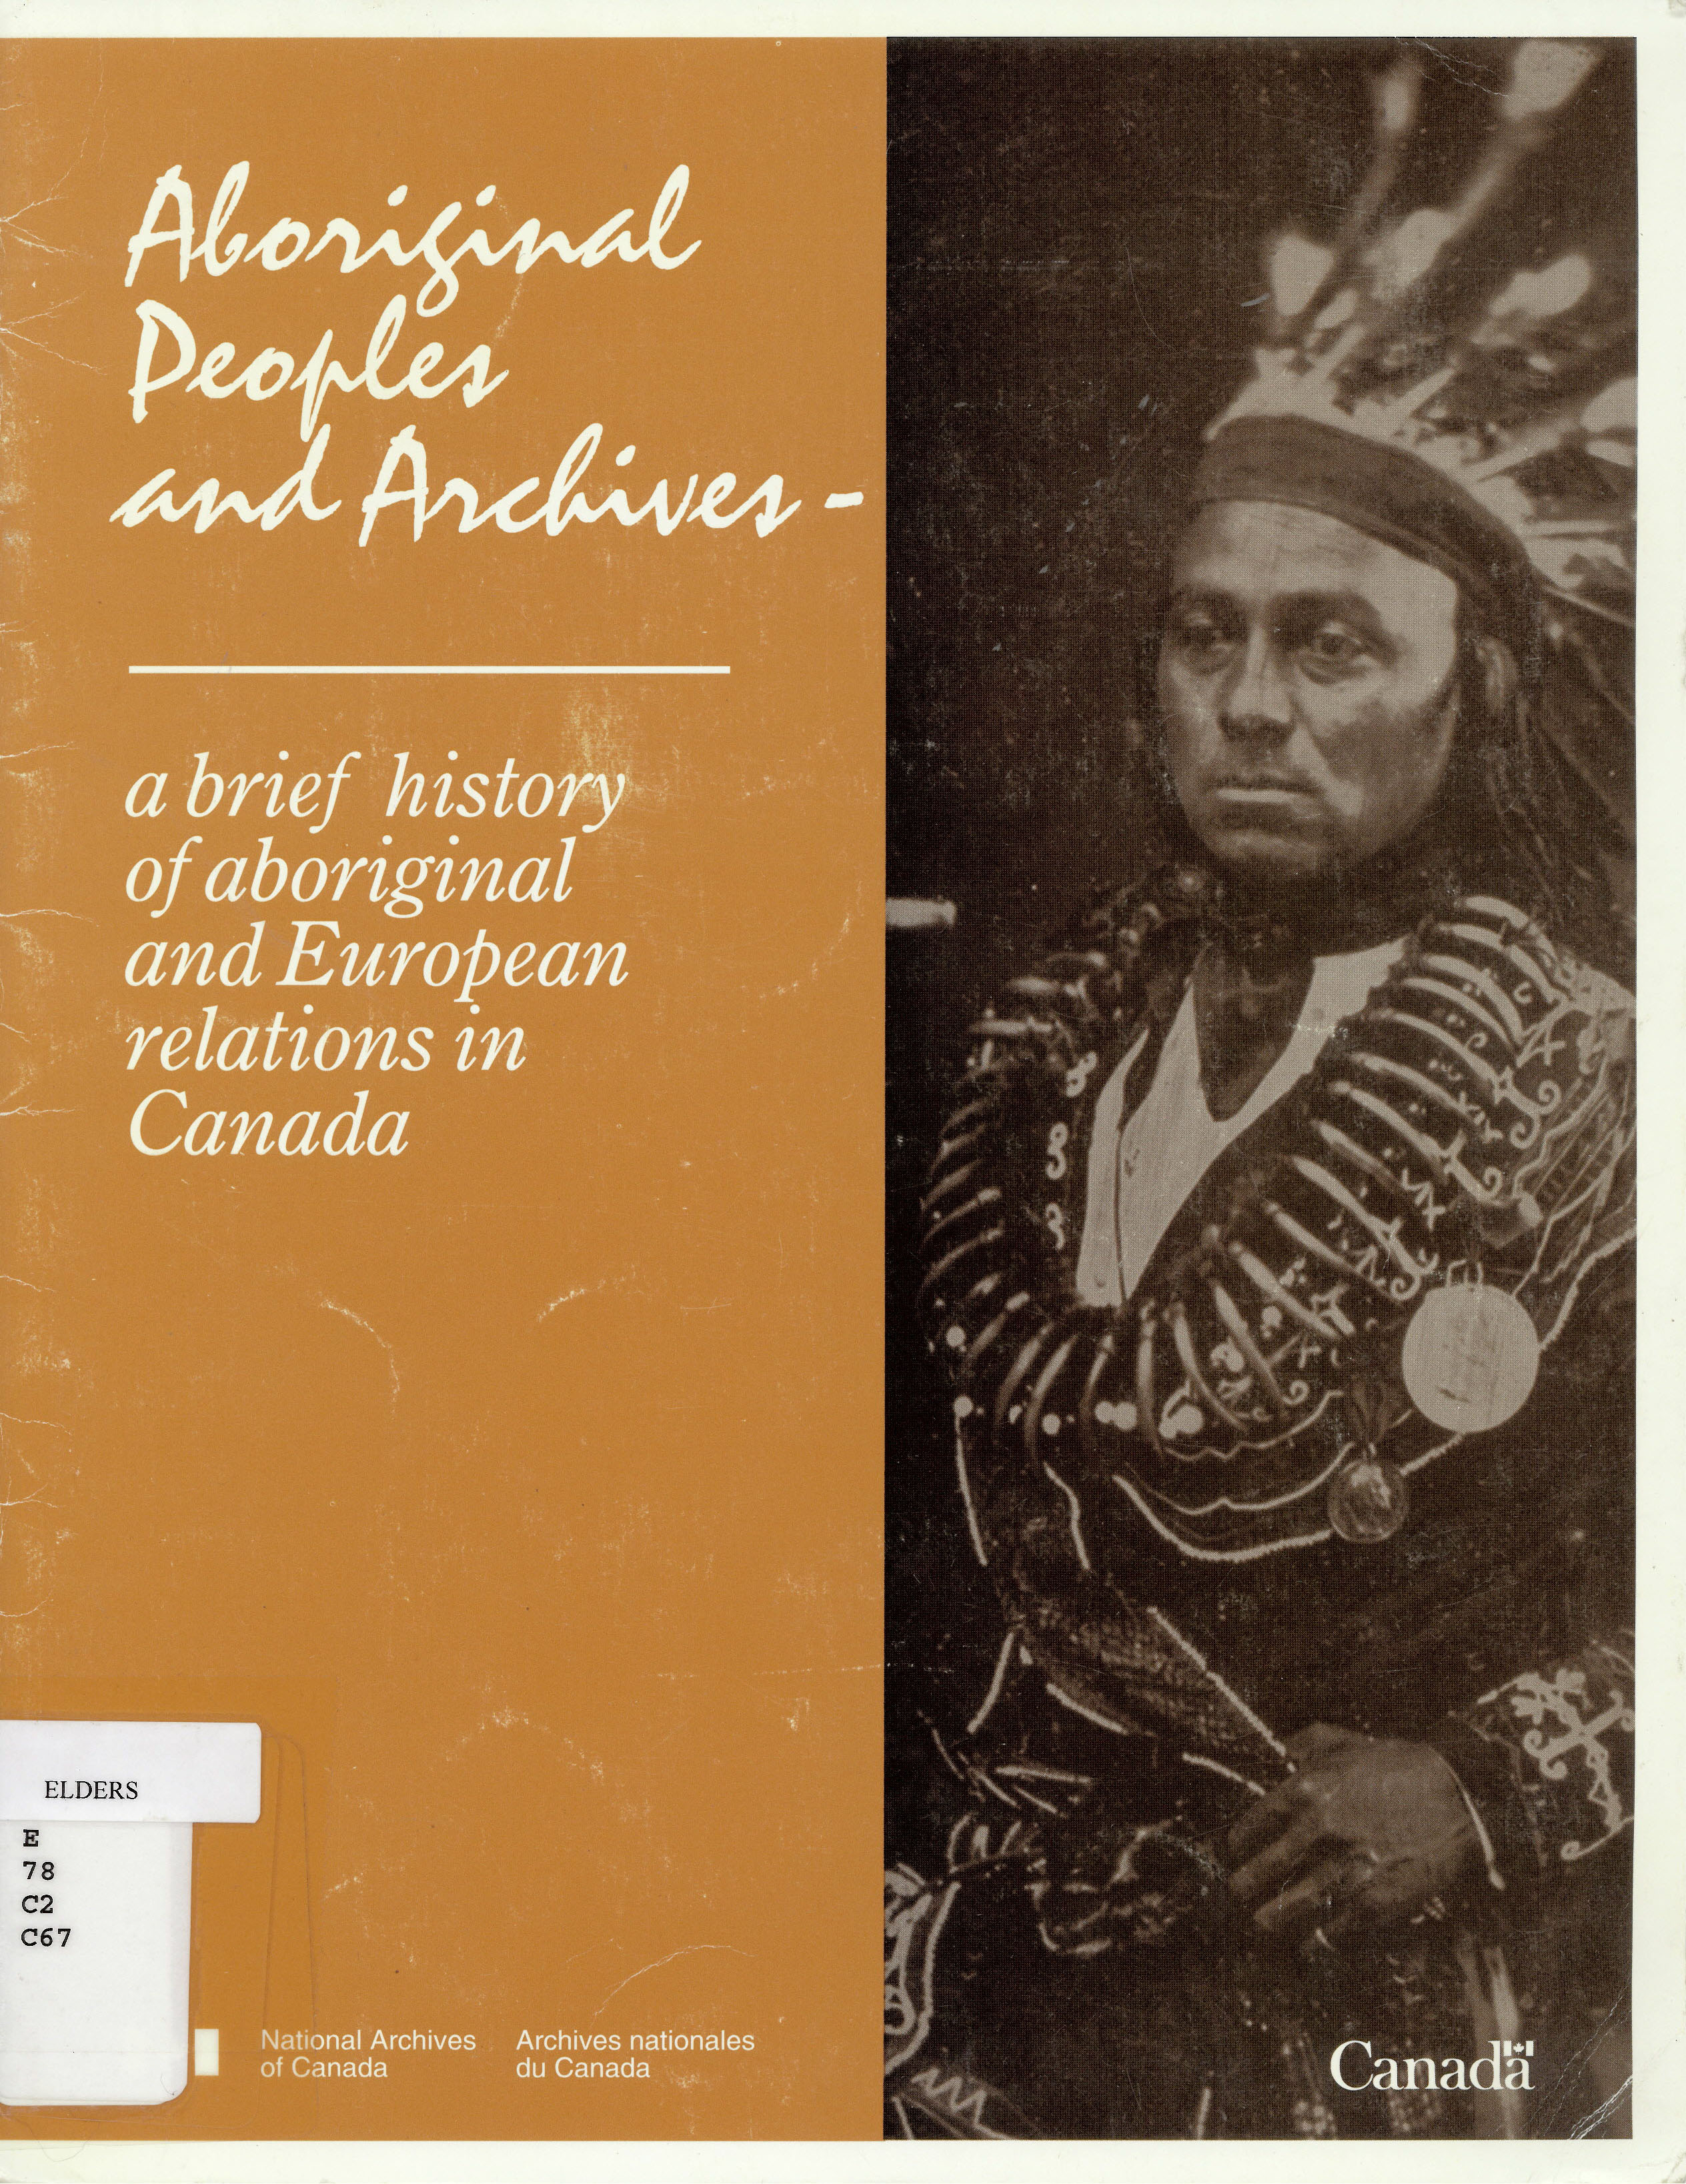 Aboriginal peoples and archives: : a brief history of aboriginal and European relations in Canada